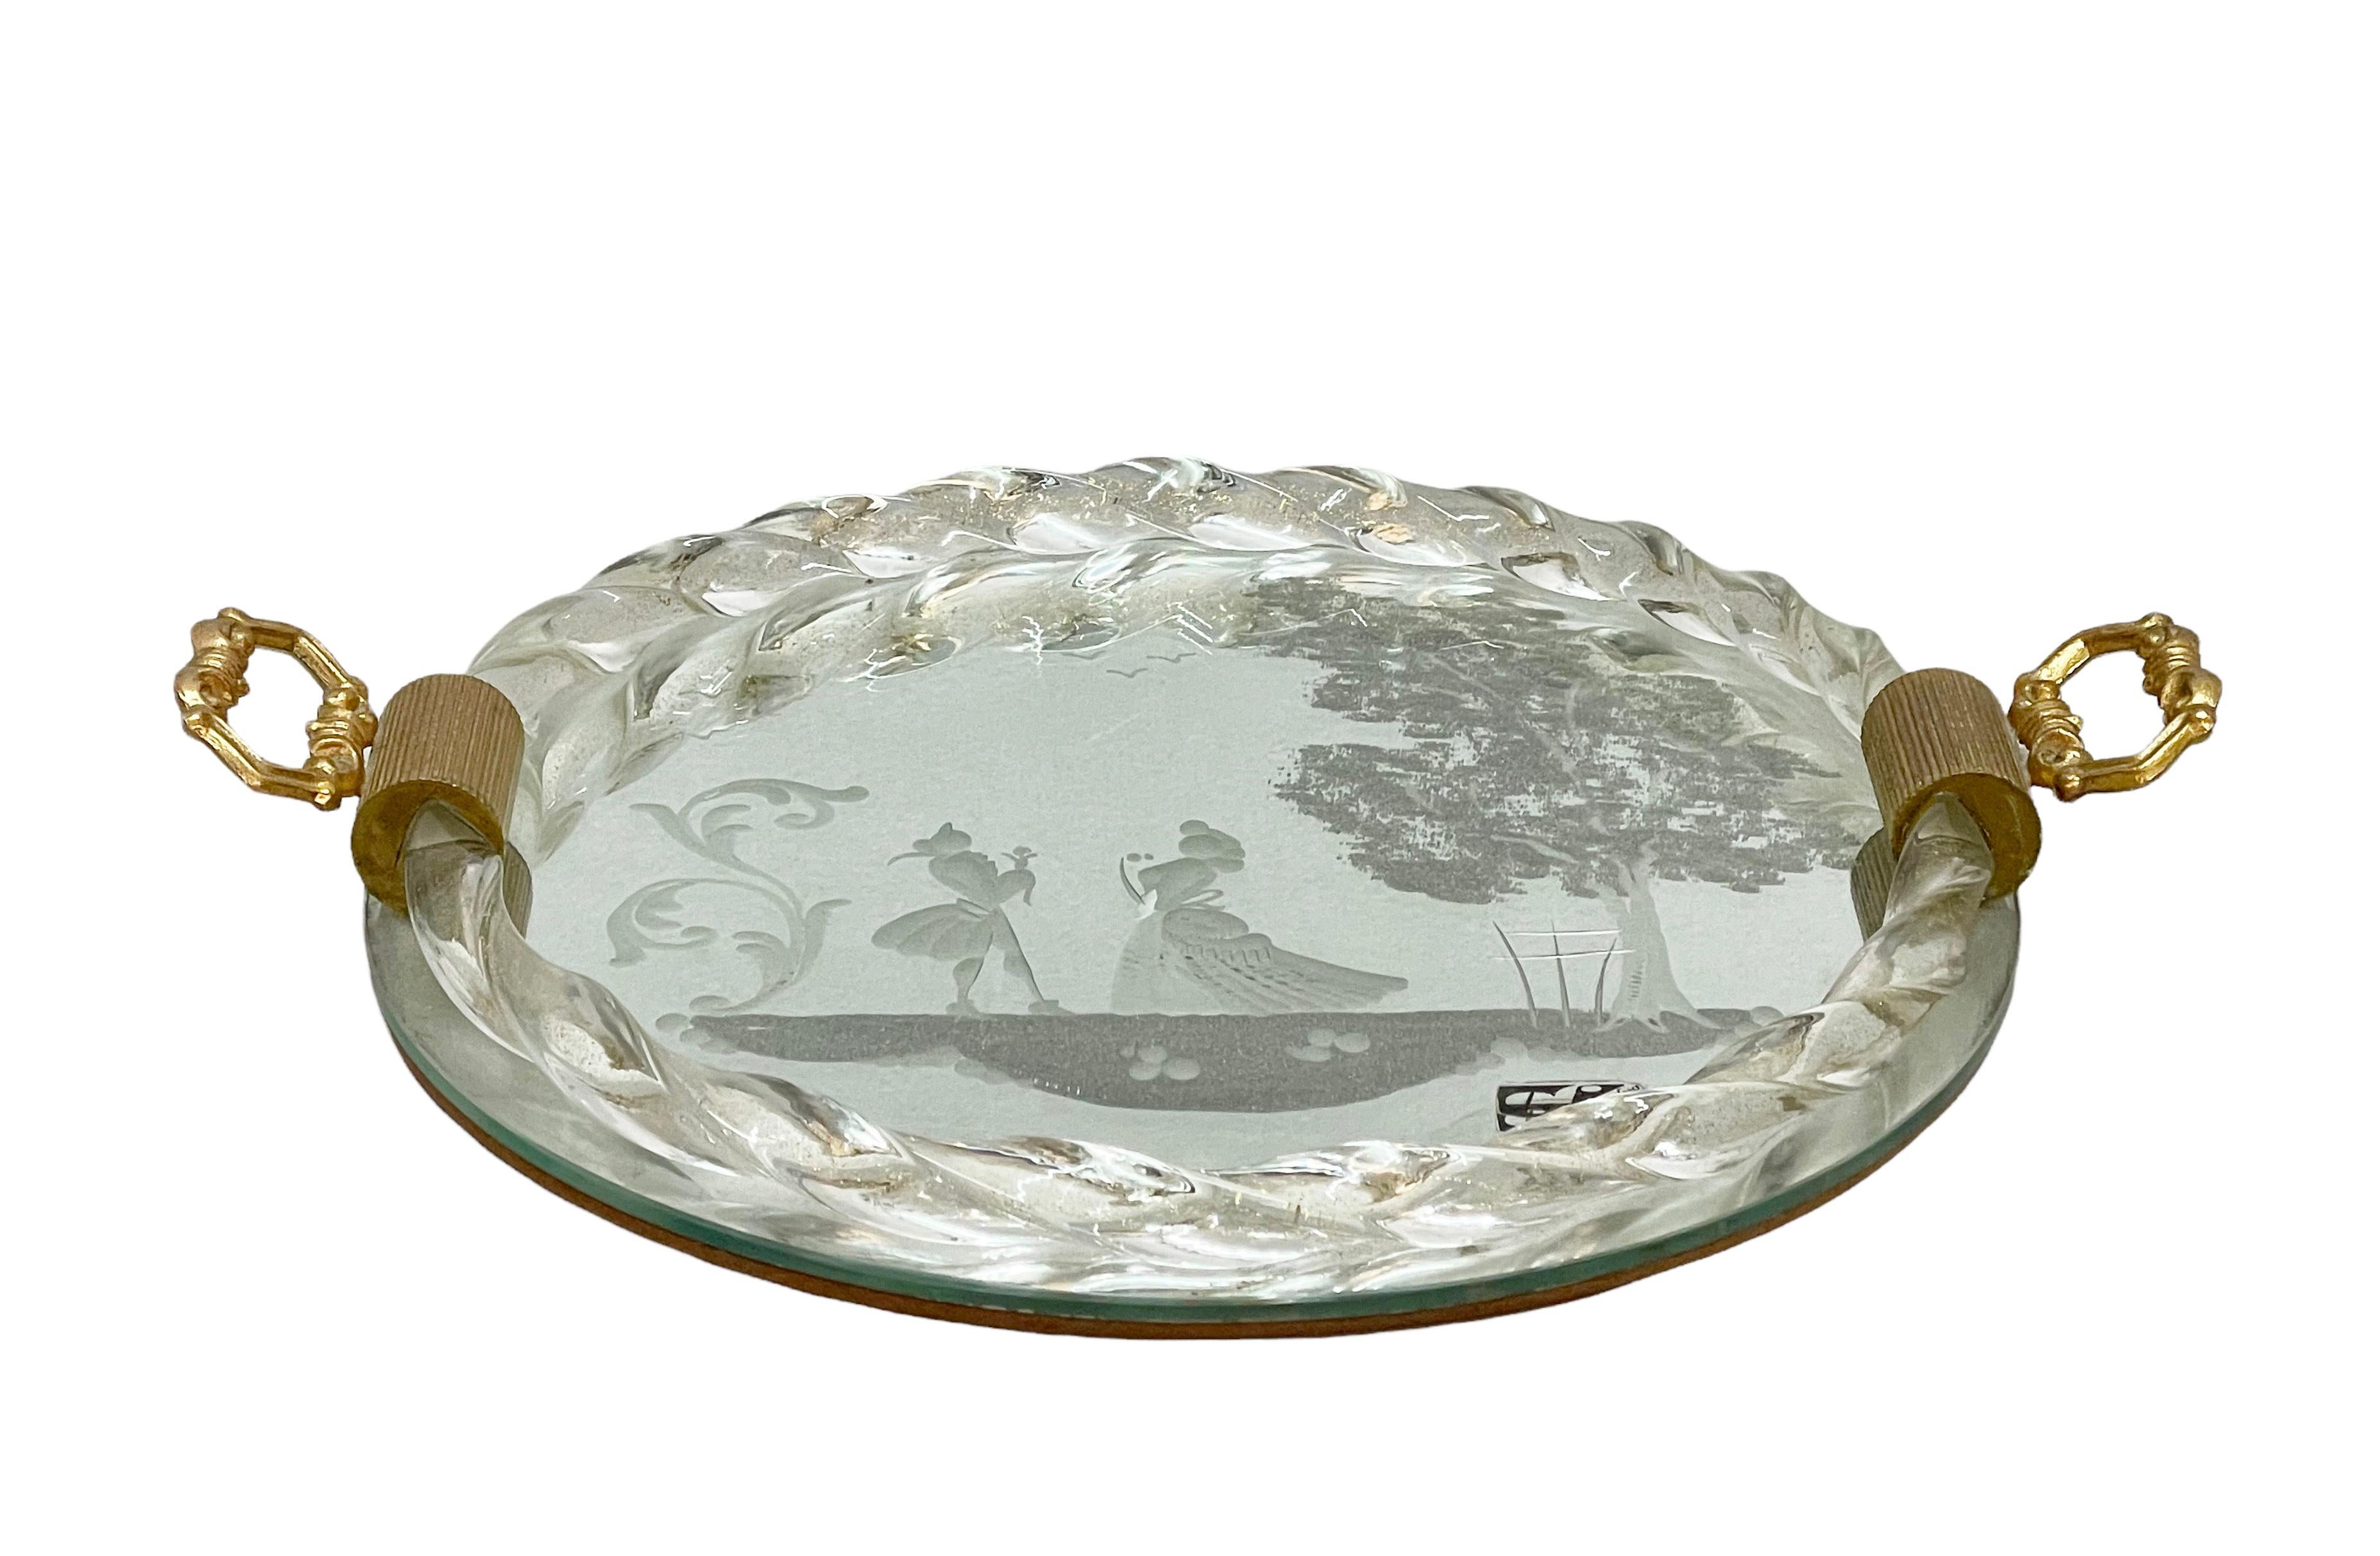 Midcentury serving tray in engraved mirror and Murano glass with gilded handles. Ongaro e Fuga designed this excellent piece in Italy, Murano island, during the 1950s. This fantastic item comes with the original label.

This remarkable object is a